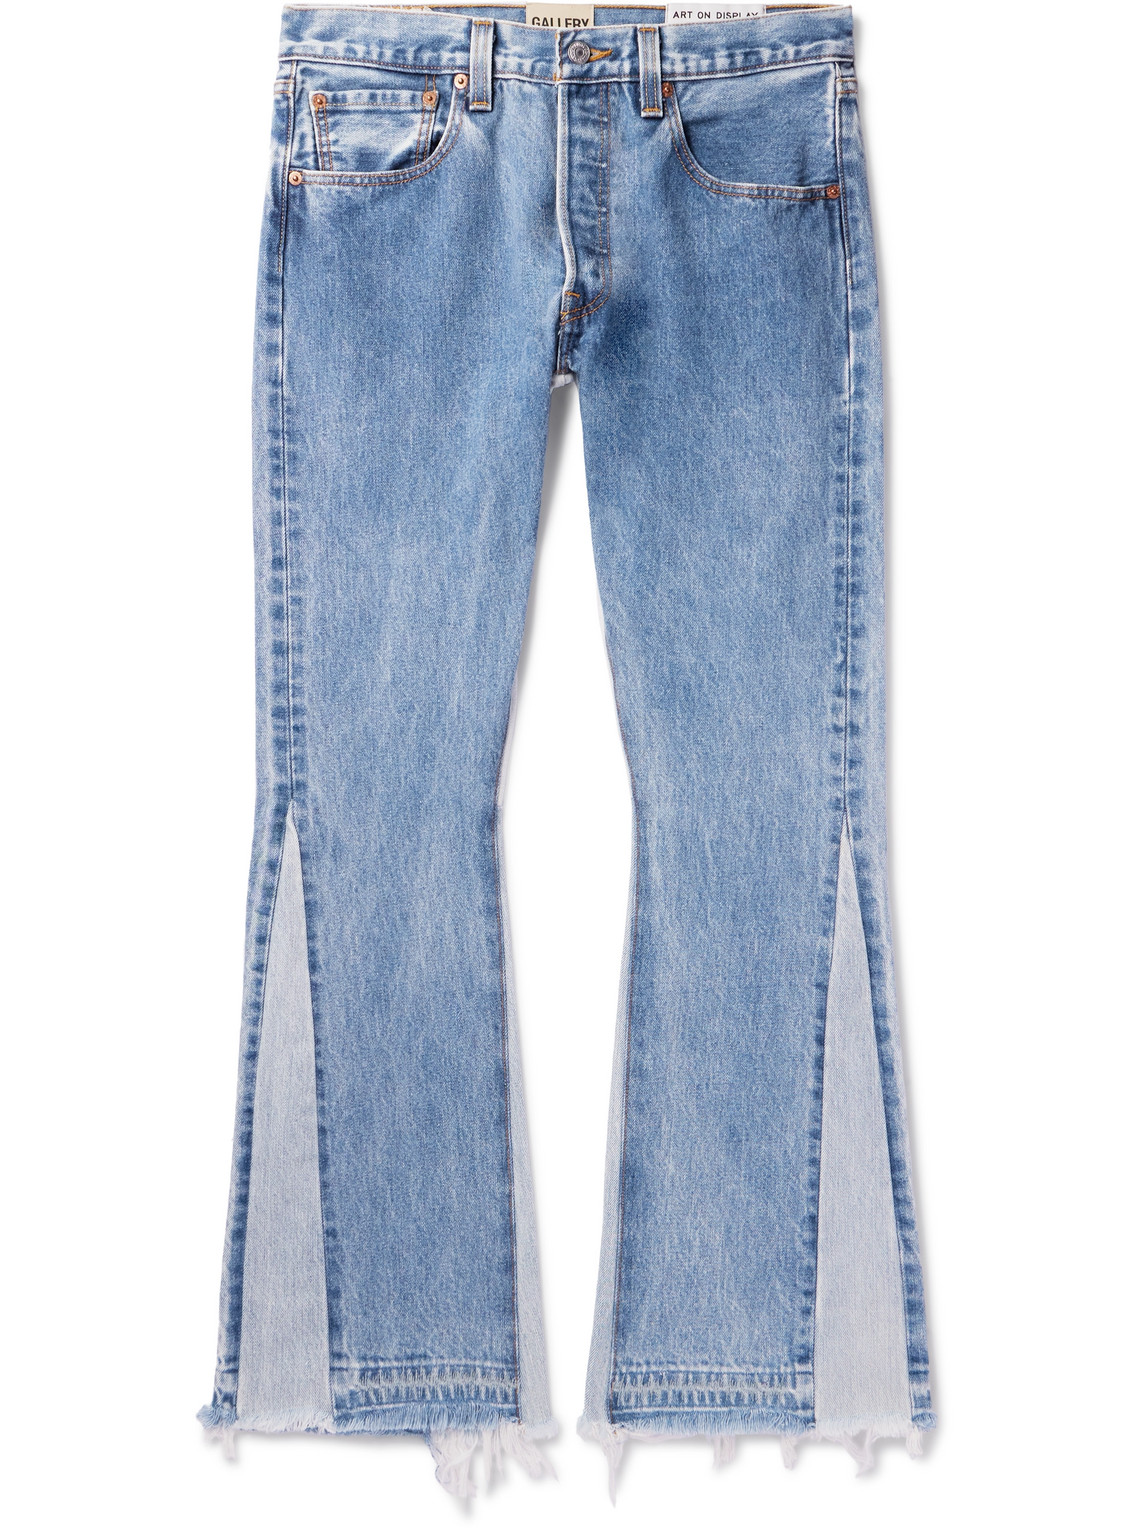 Gallery Dept. La Flare Distressed Two-tone Jeans In Blue